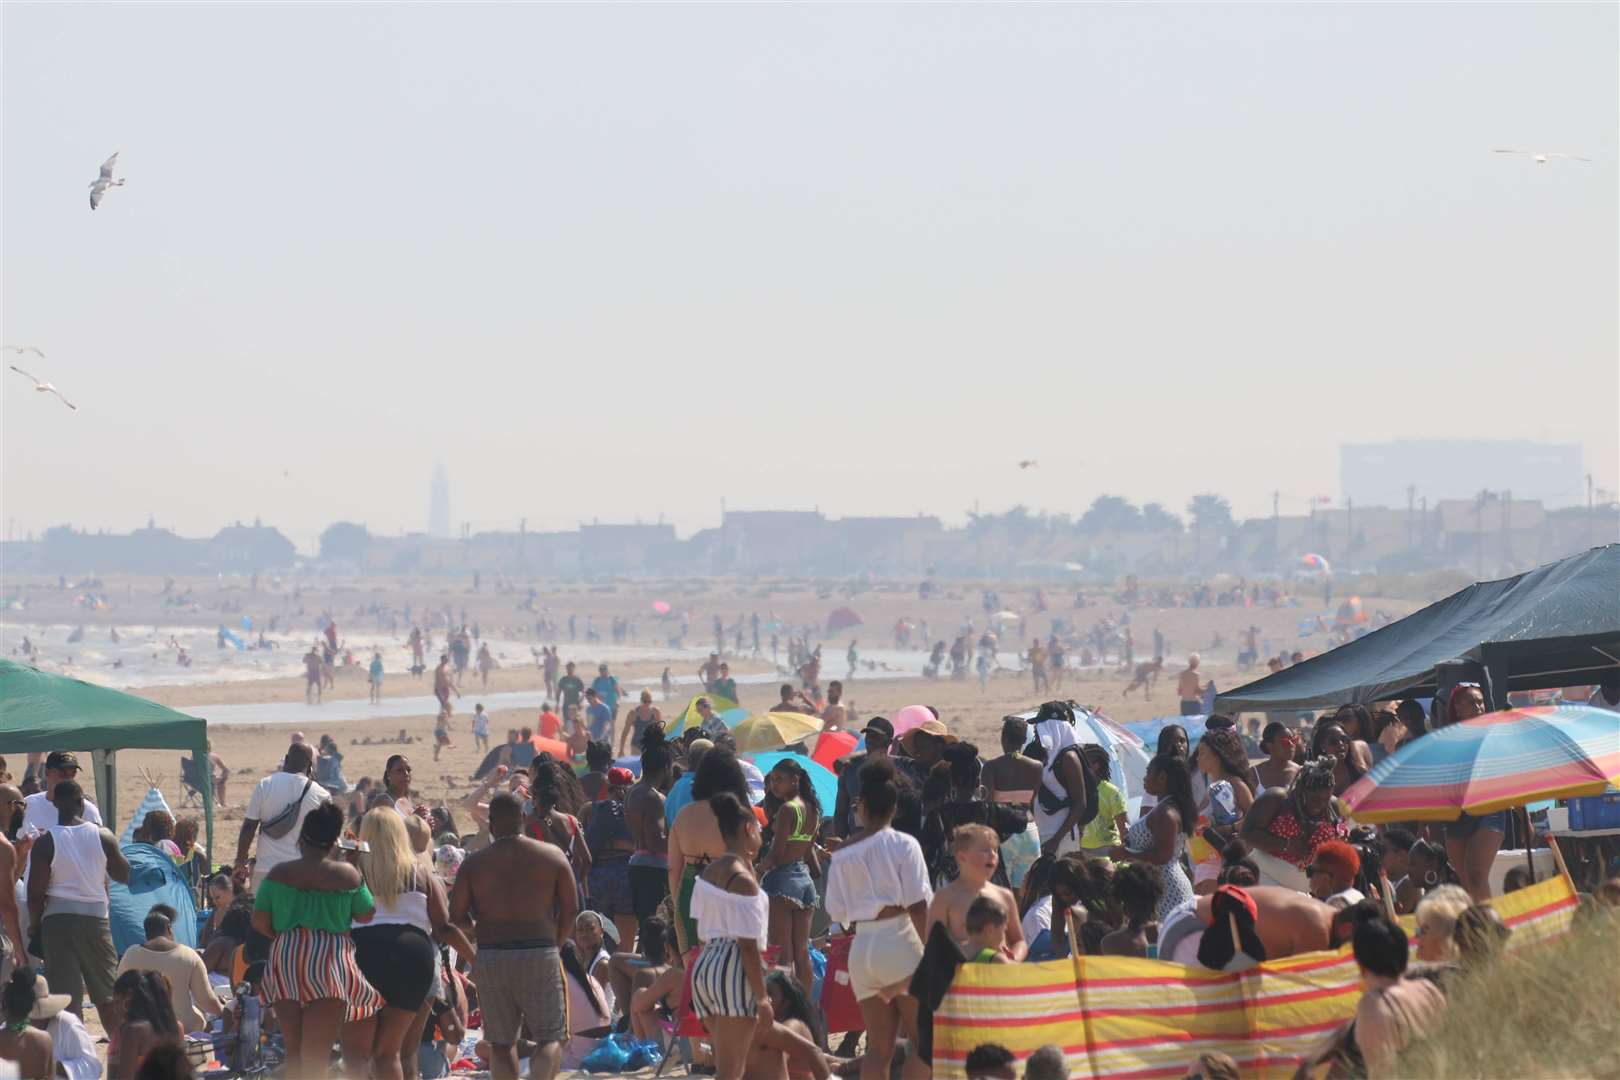 Thousands of people took to Greatstone beach as part of a pre-planned 'beach cookout' on Sunday